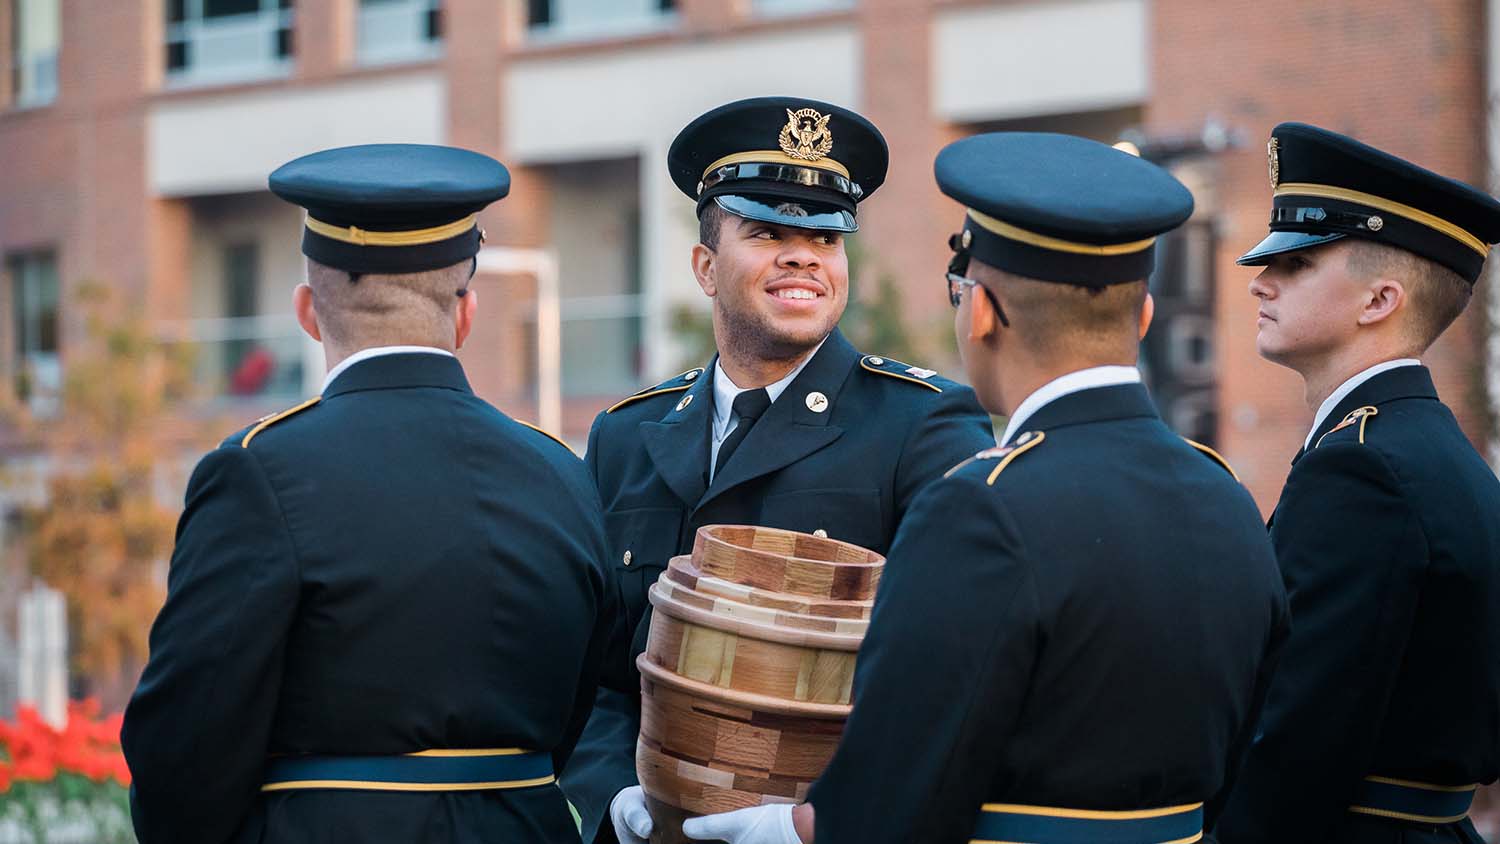 Four ROTC cadets standing together in uniform. 